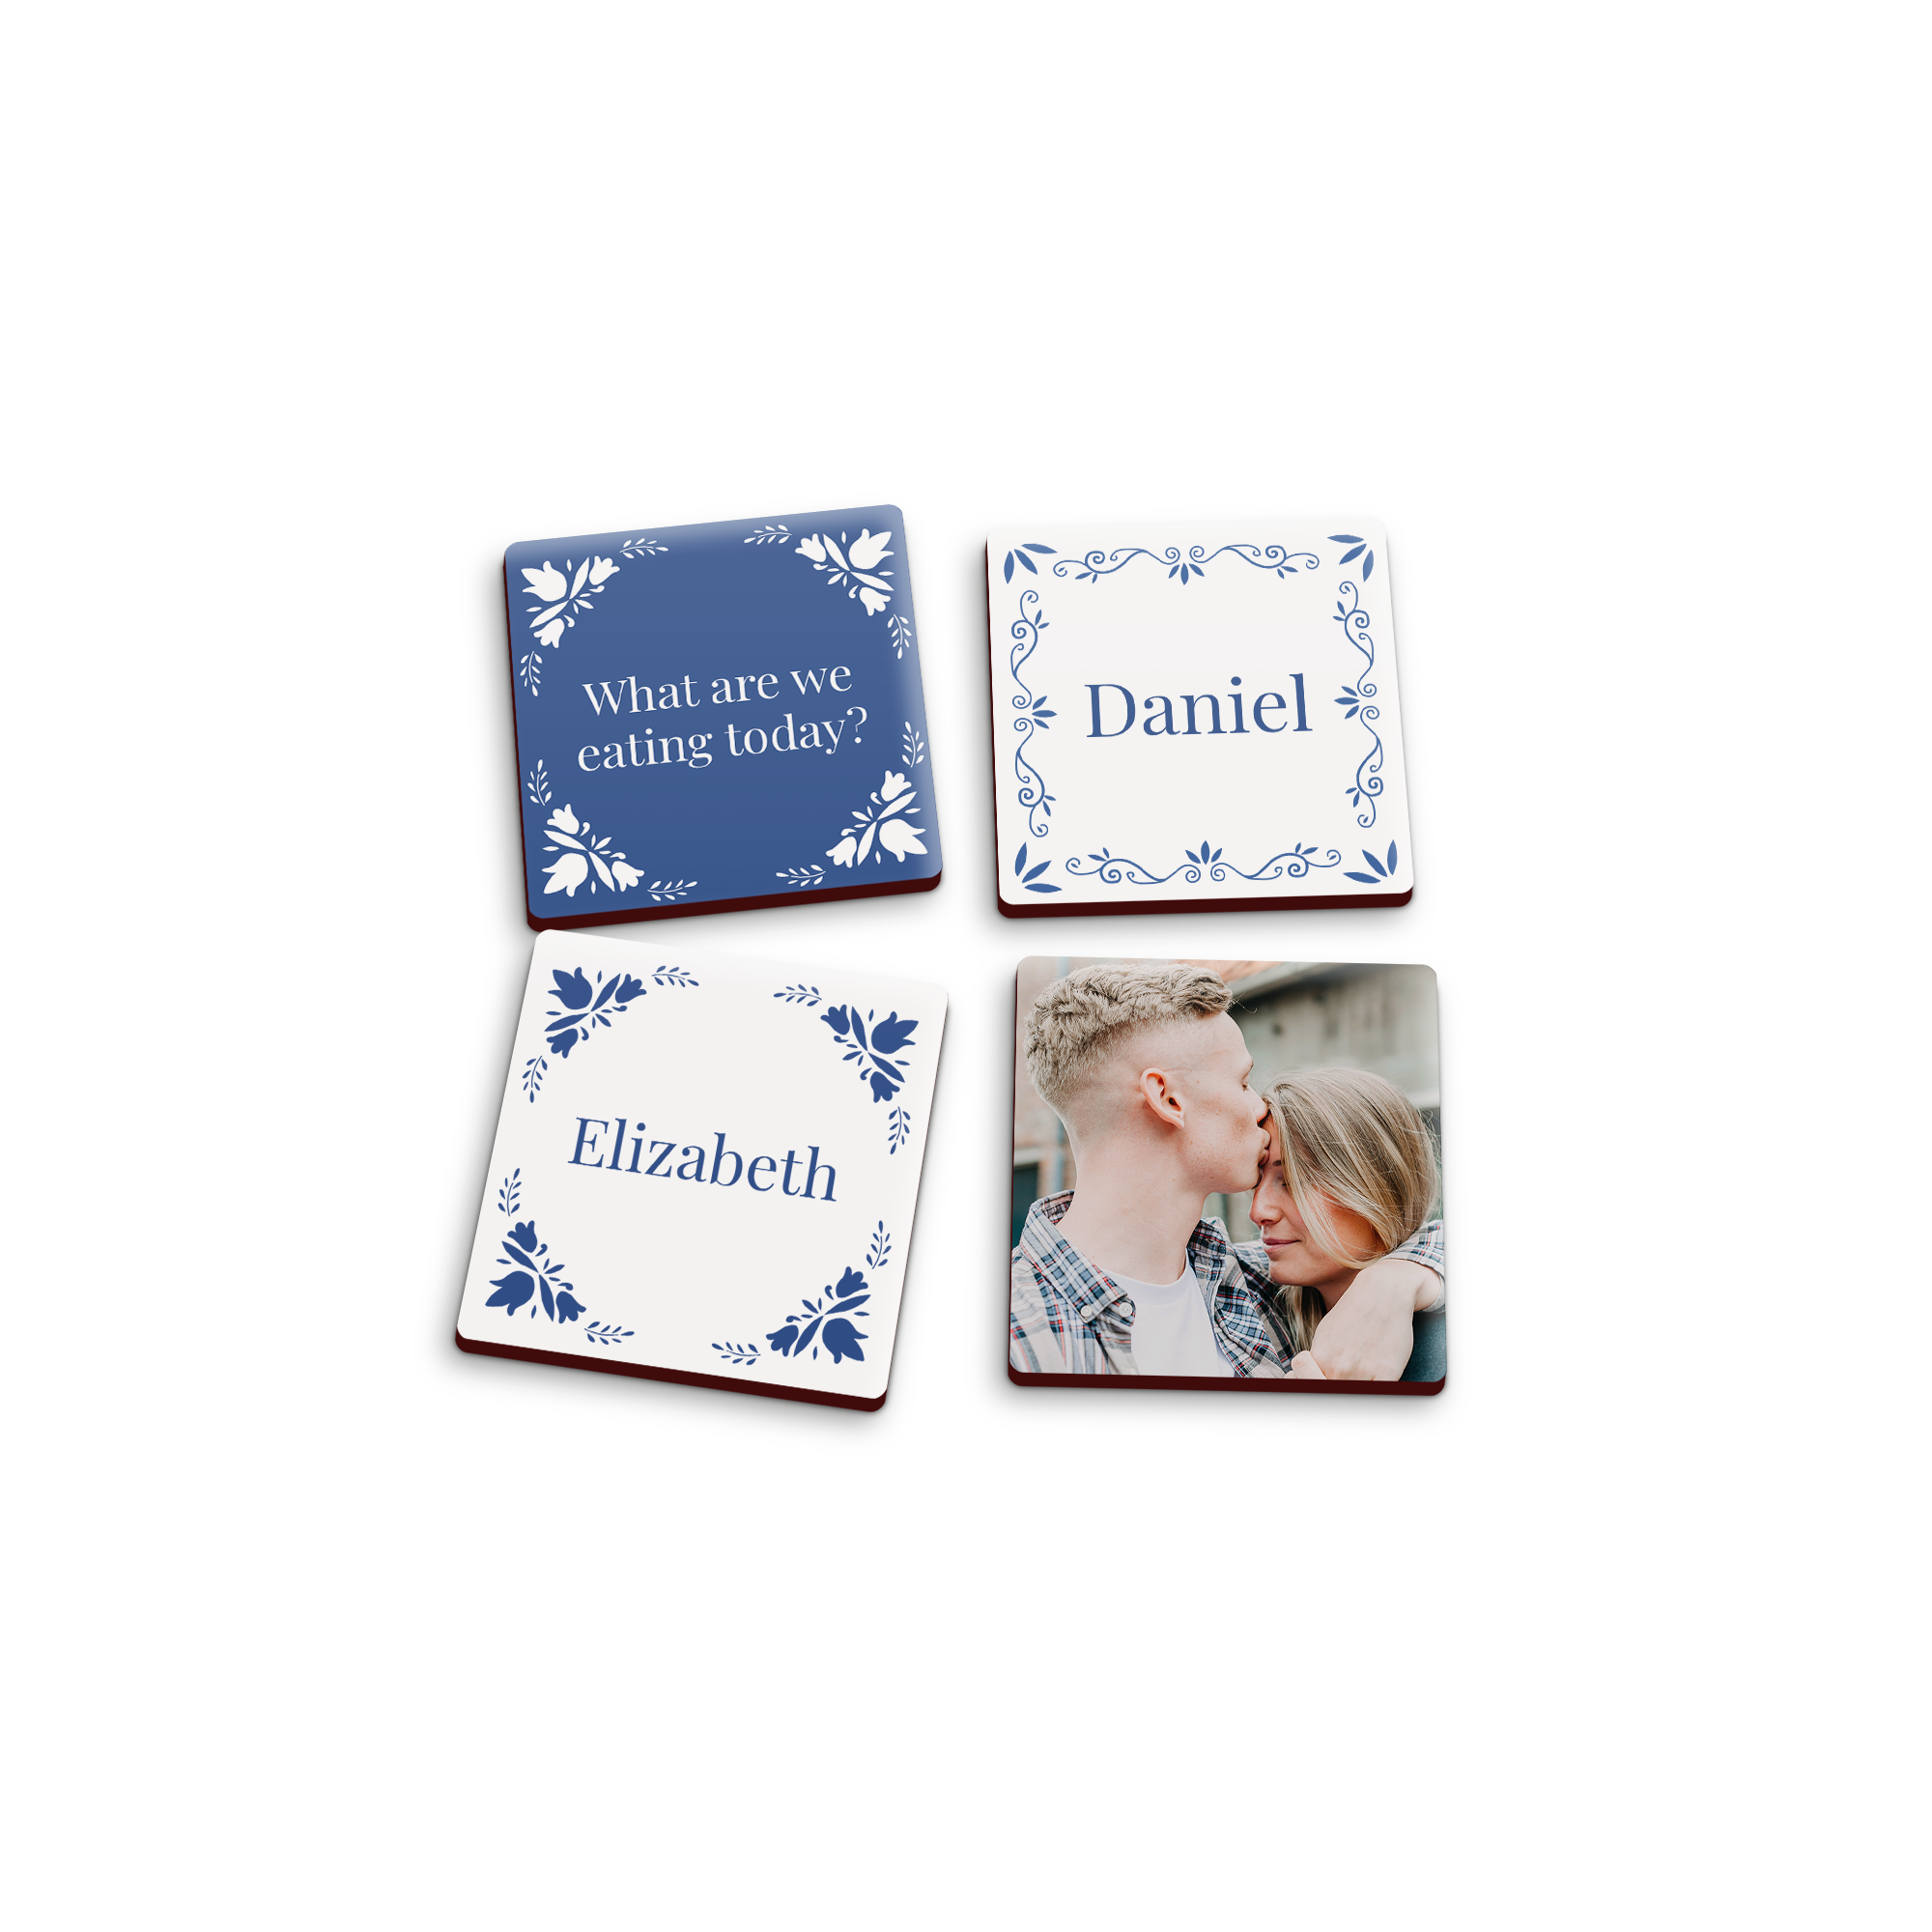 Personalised magnets - Square - 4 pcs